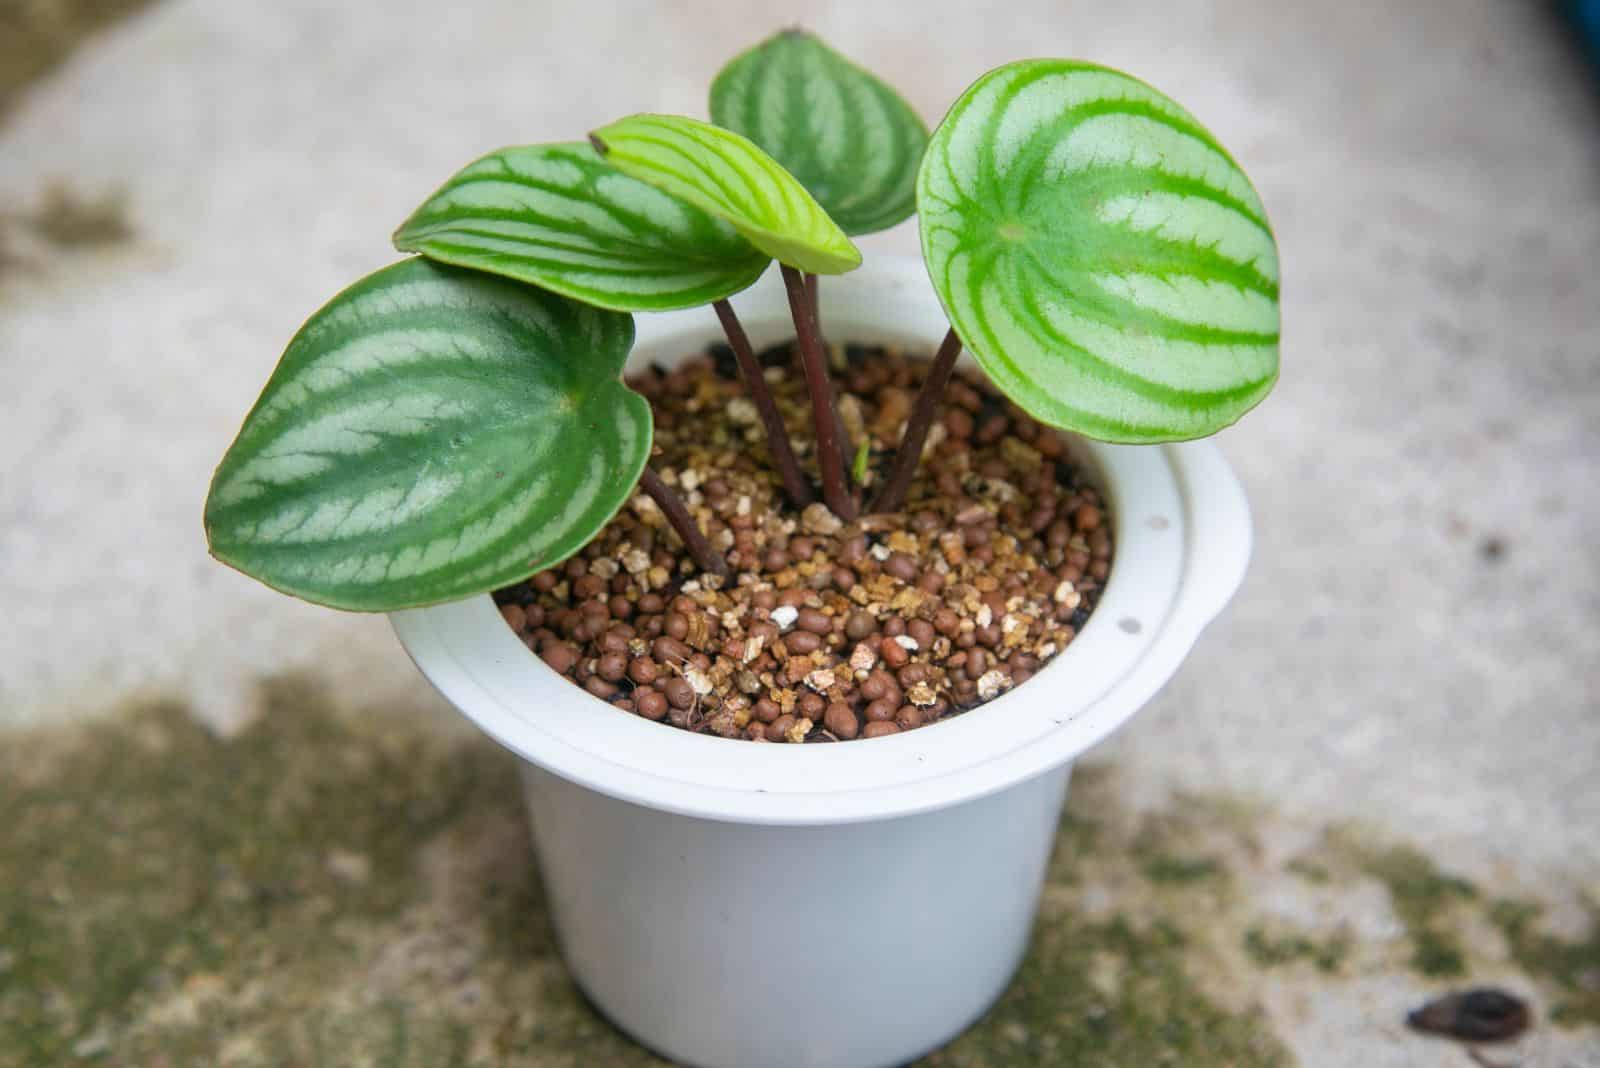 Peperomia in a white pot